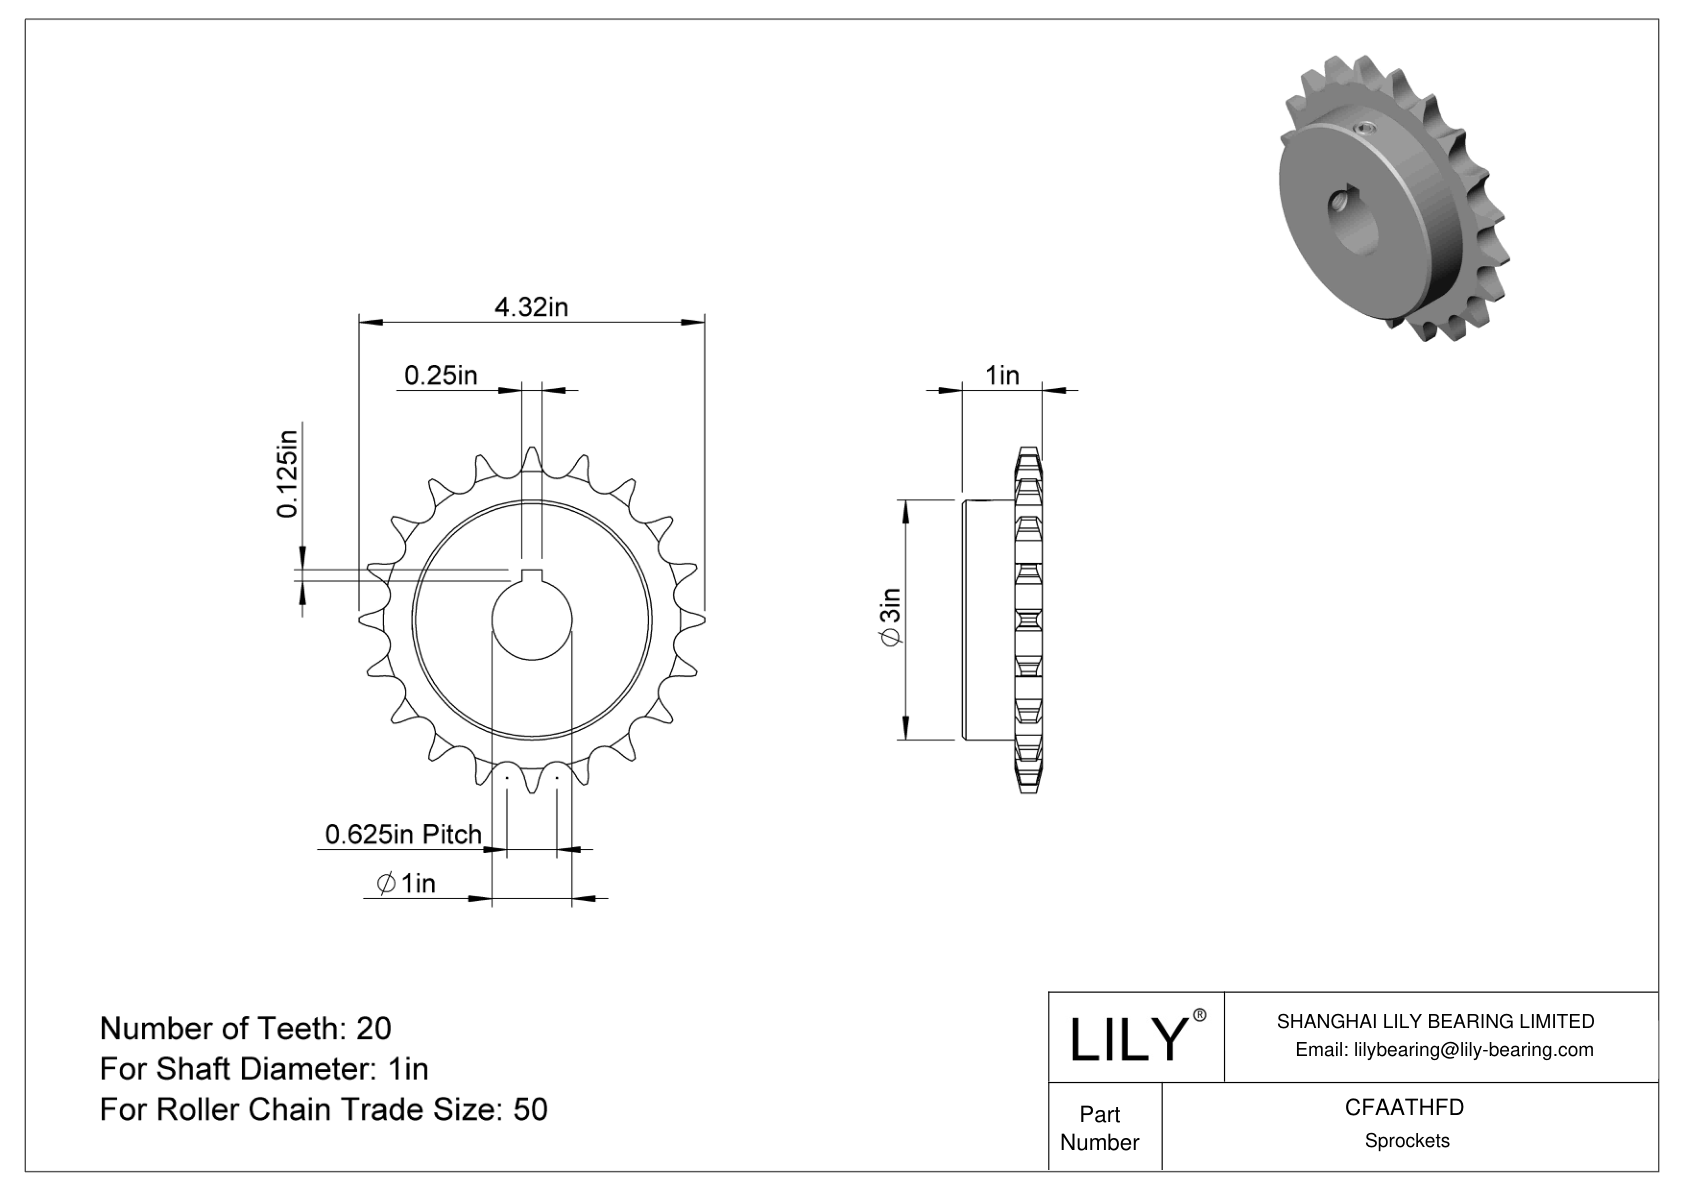 CFAATHFD Wear-Resistant Sprockets for ANSI Roller Chain cad drawing